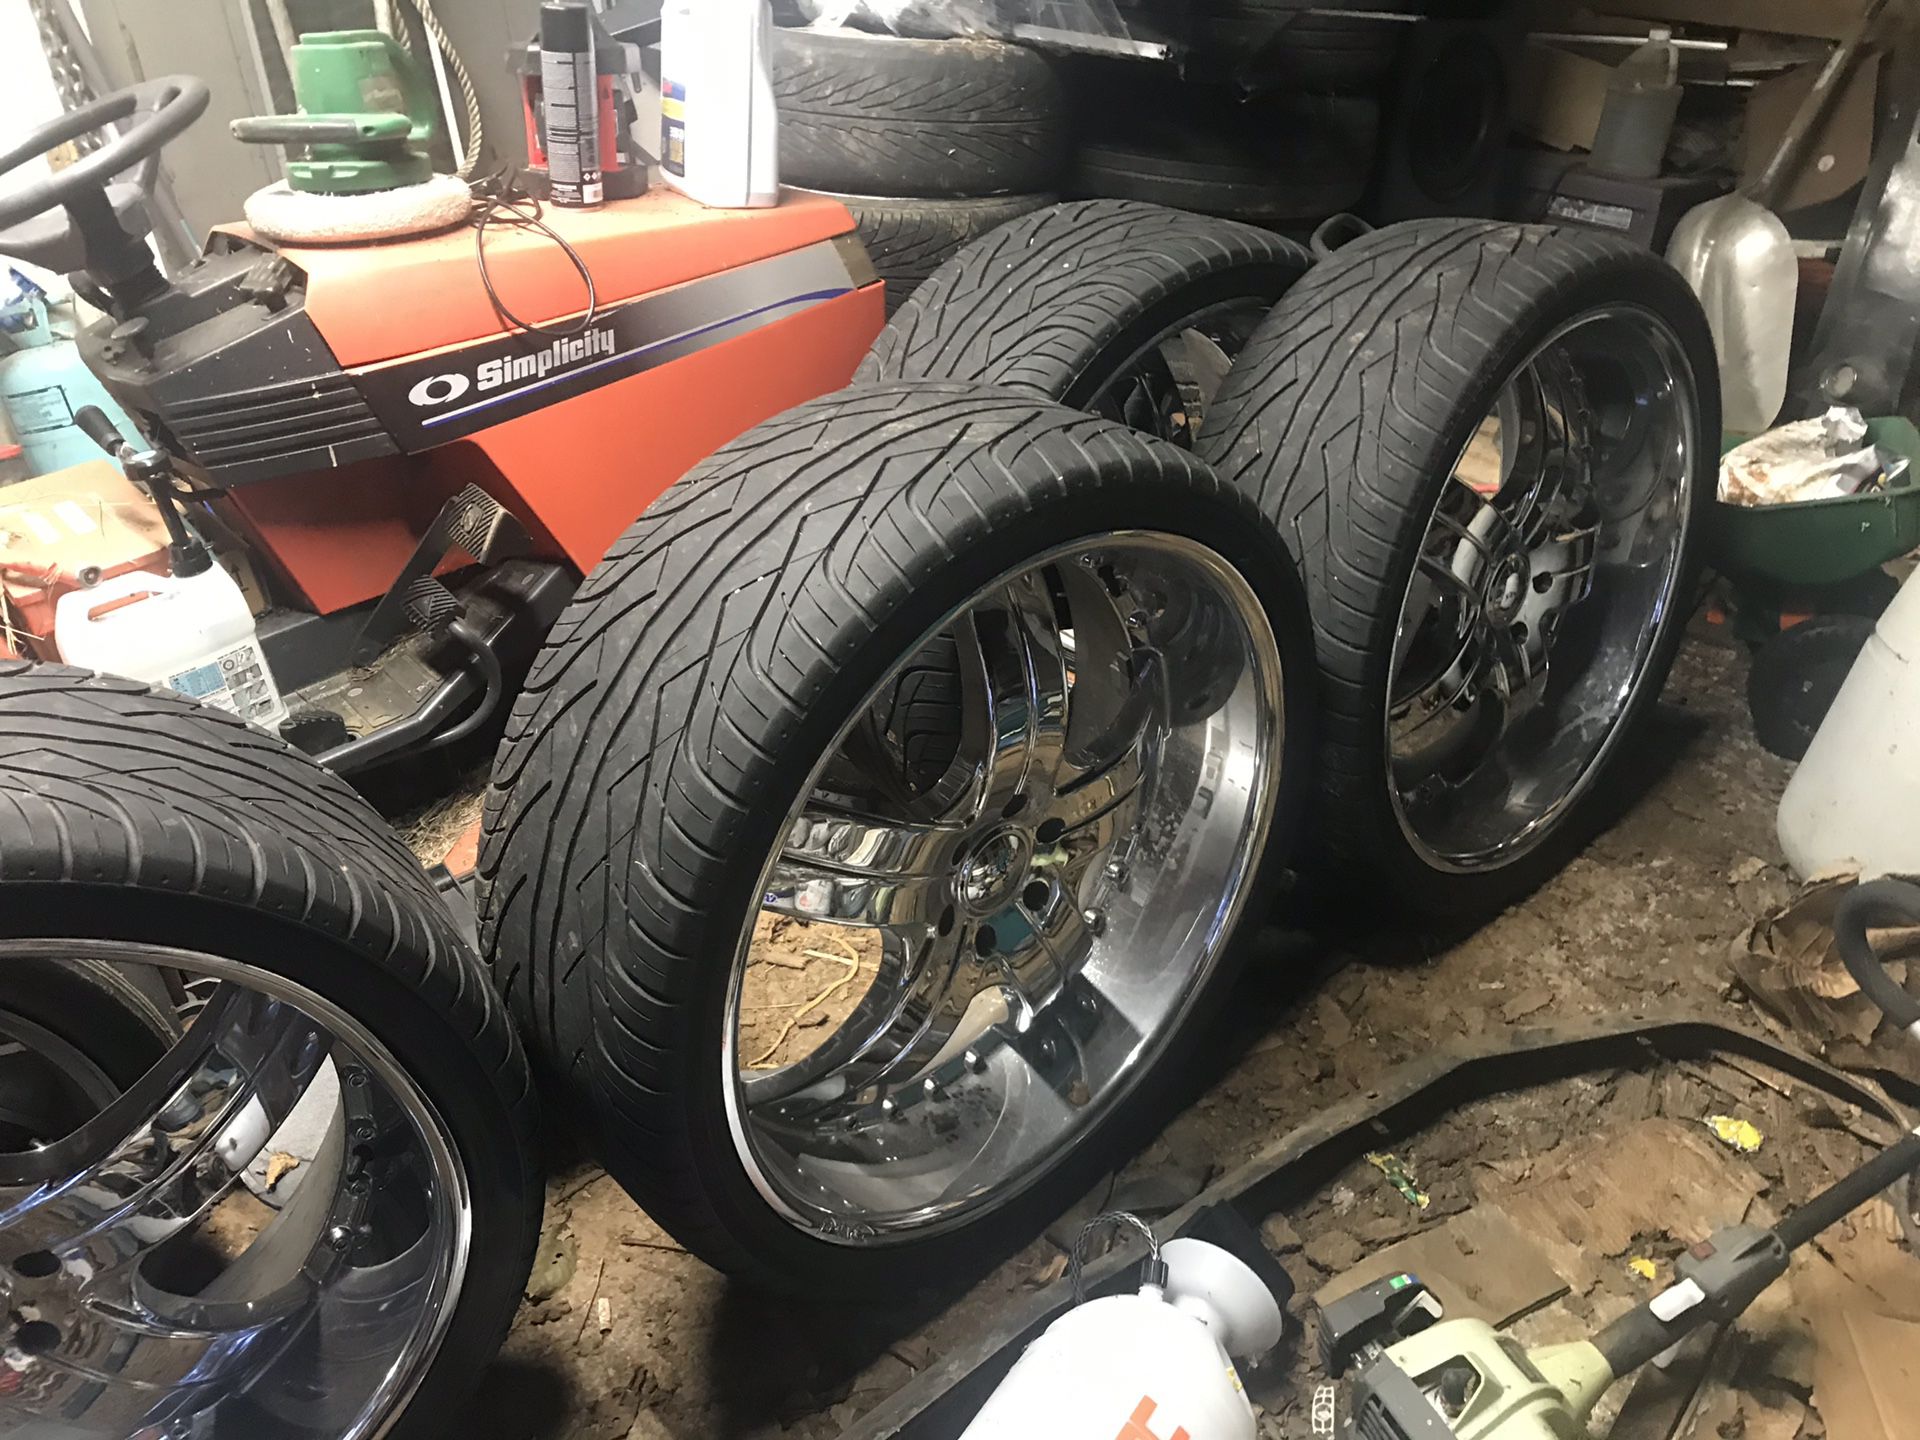 26” rims and tires